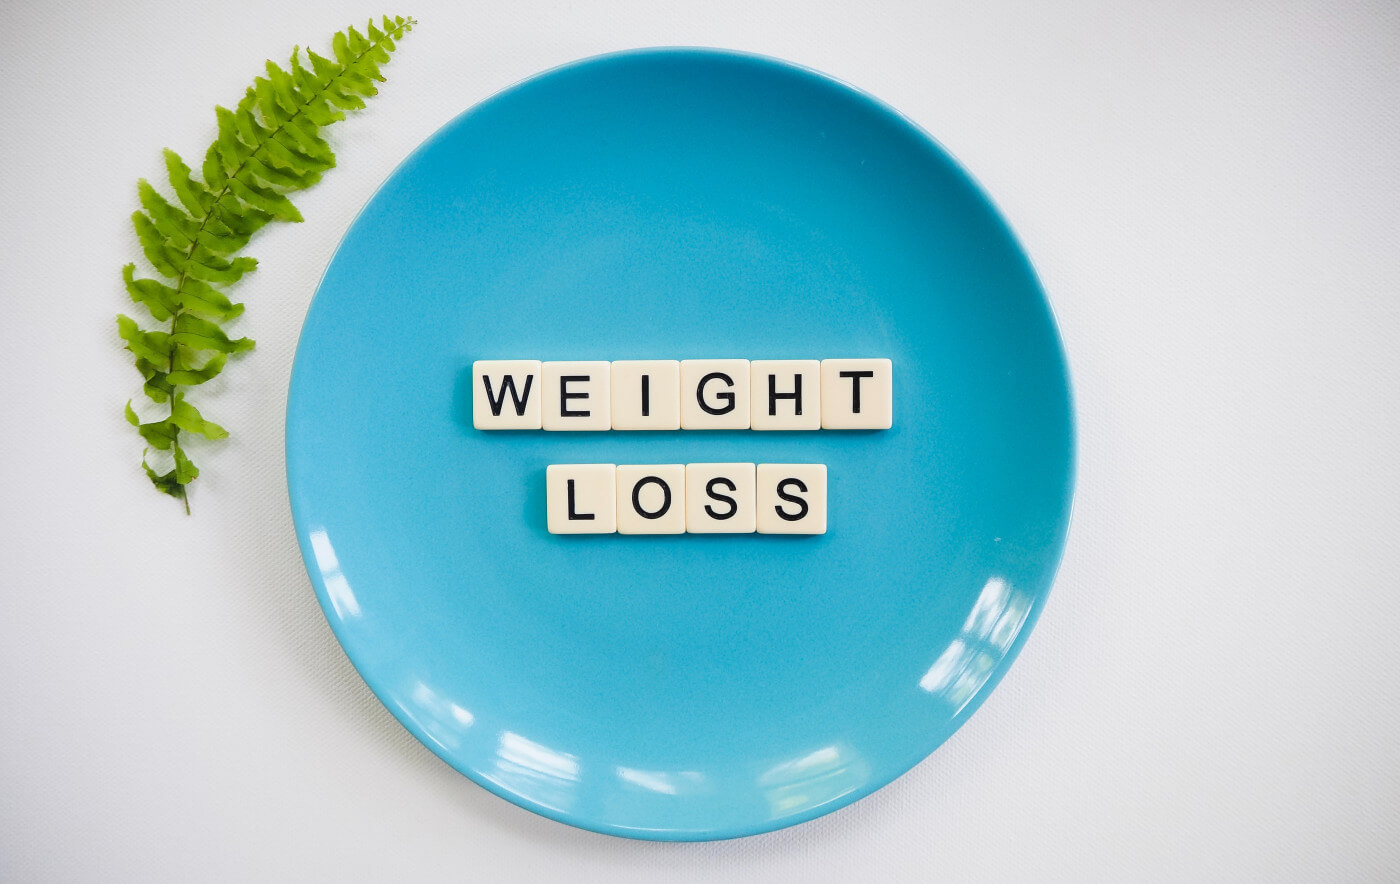 Scrabble tiles on plate spelling weight loss | Preoperative weight loss before bariatric surgery